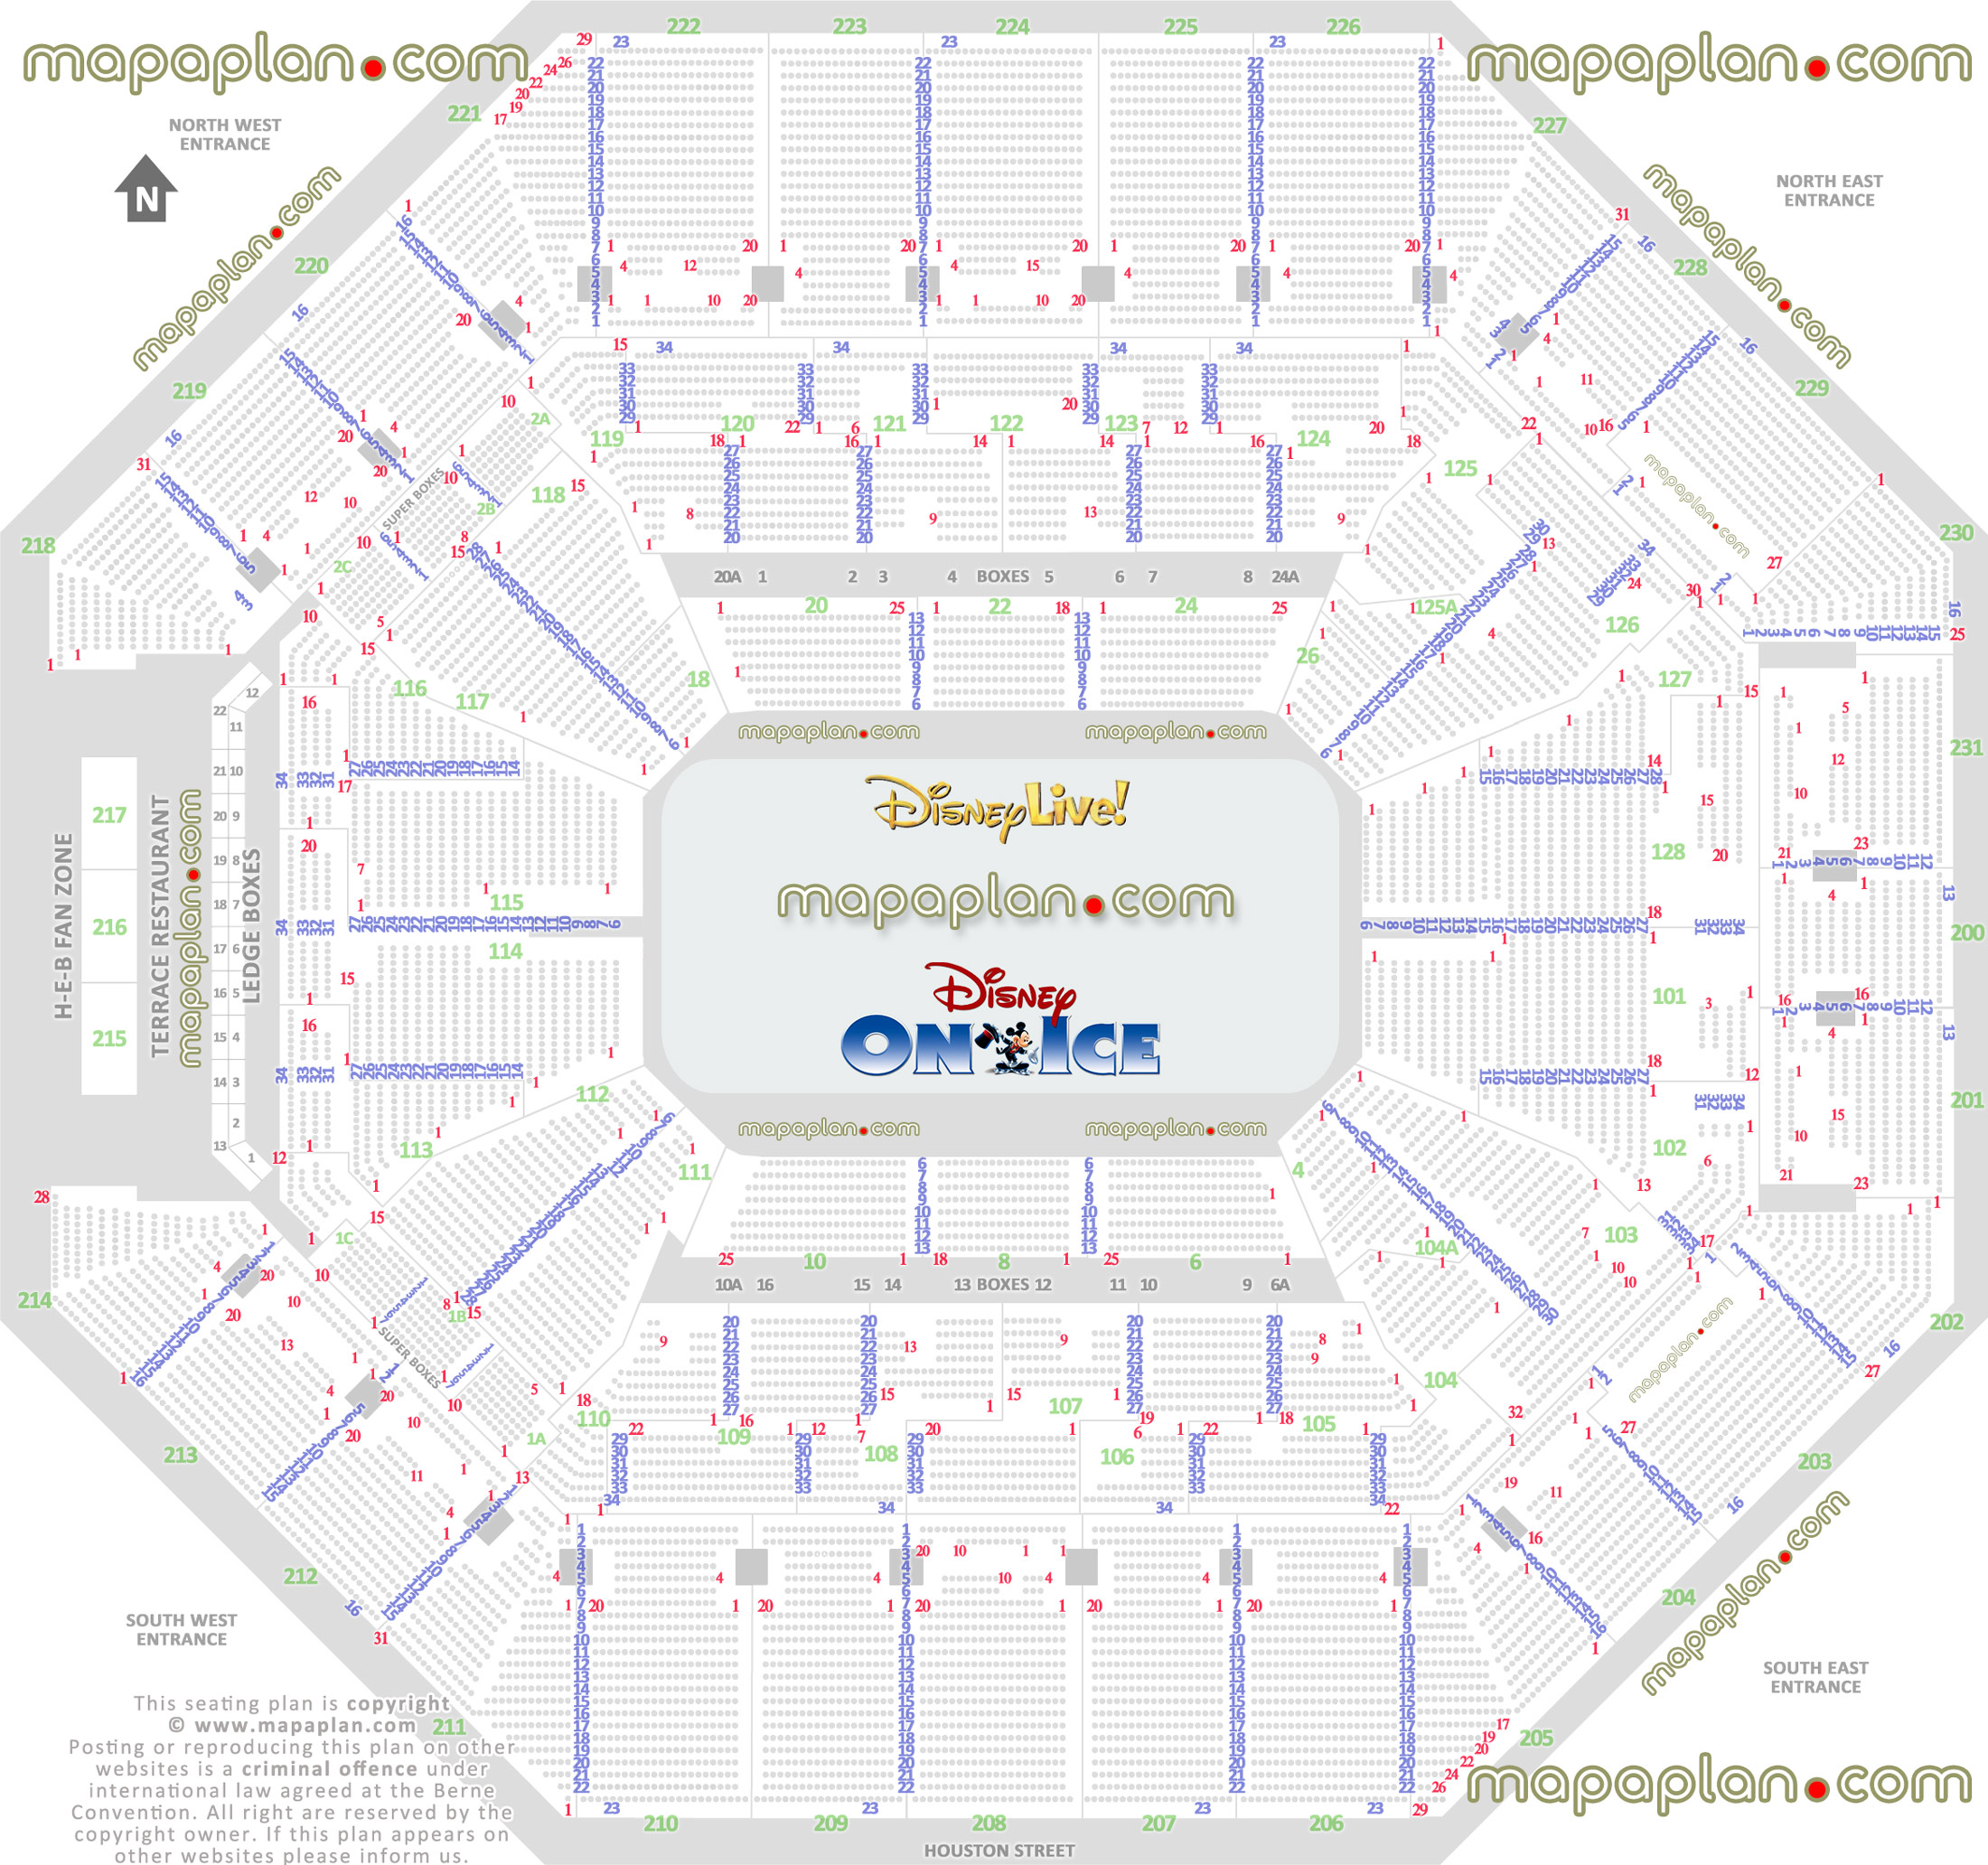 disney live disney ice arena chart best seat finder 3d tool precise detailed aisle seat row numbering location data plan ice rink event floor level charter plaza lower concourse upper balcony terrace seating San Antonio ATT Center seating chart